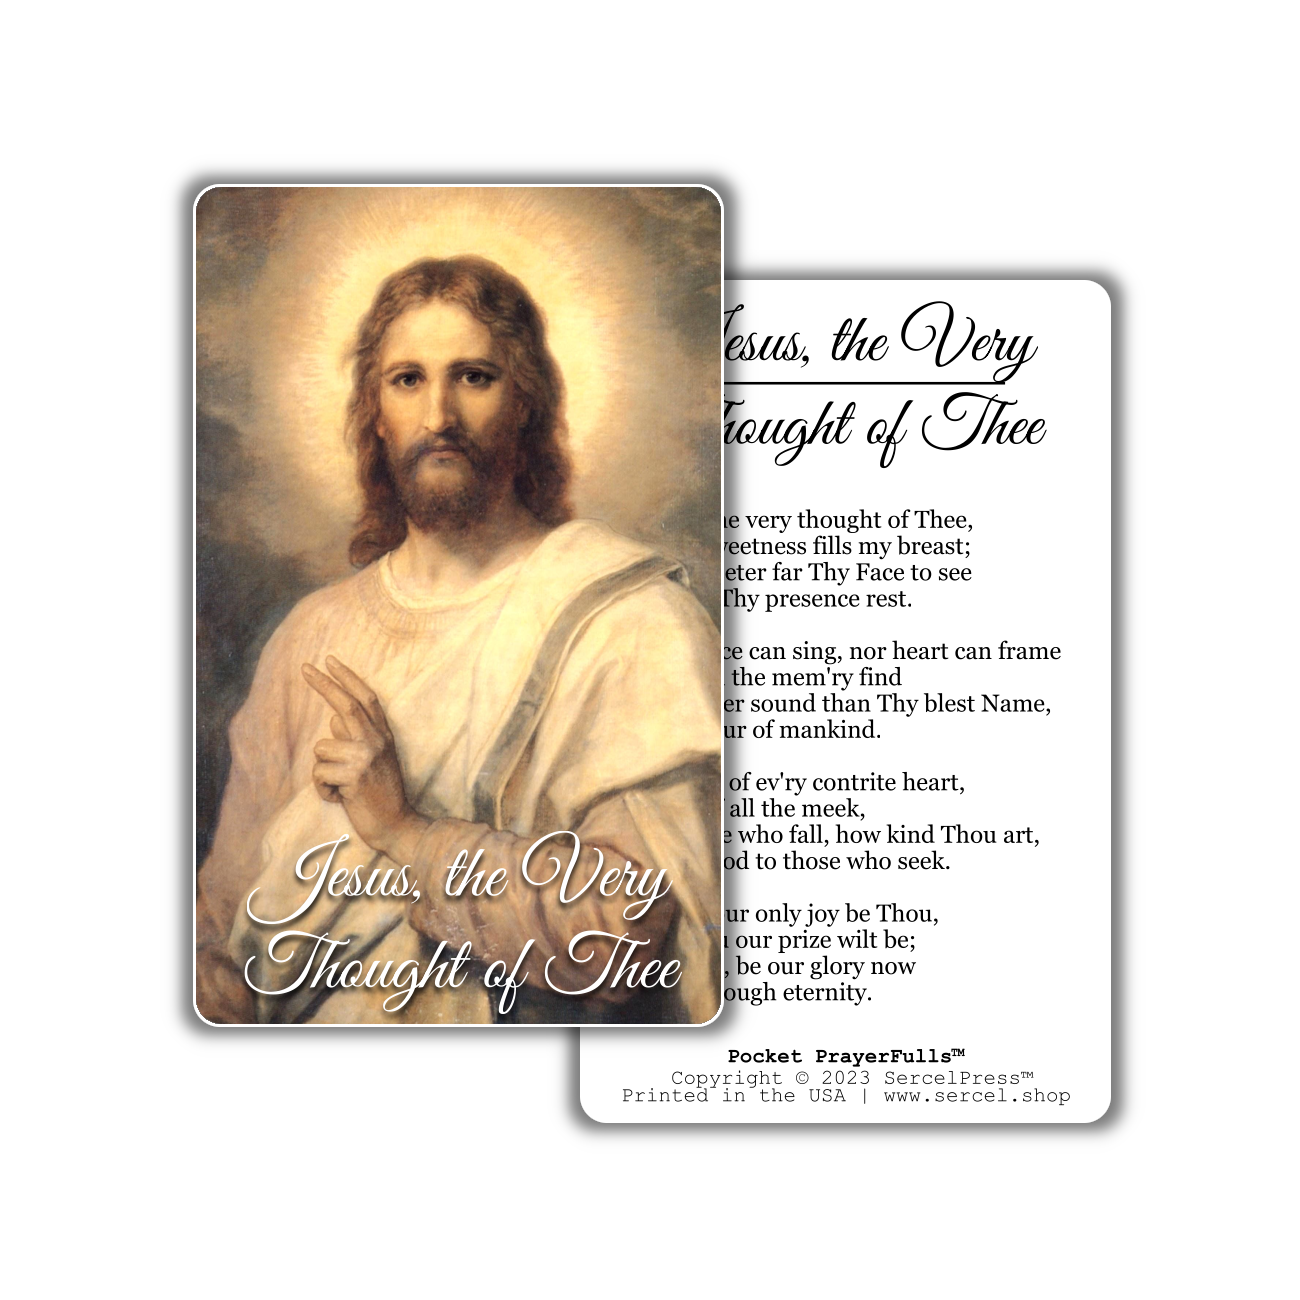 Jesus, the Very Thought of Thee: Pocket PrayerFulls™ | Durable Wallet Prayer Cards | Catholic Hymns